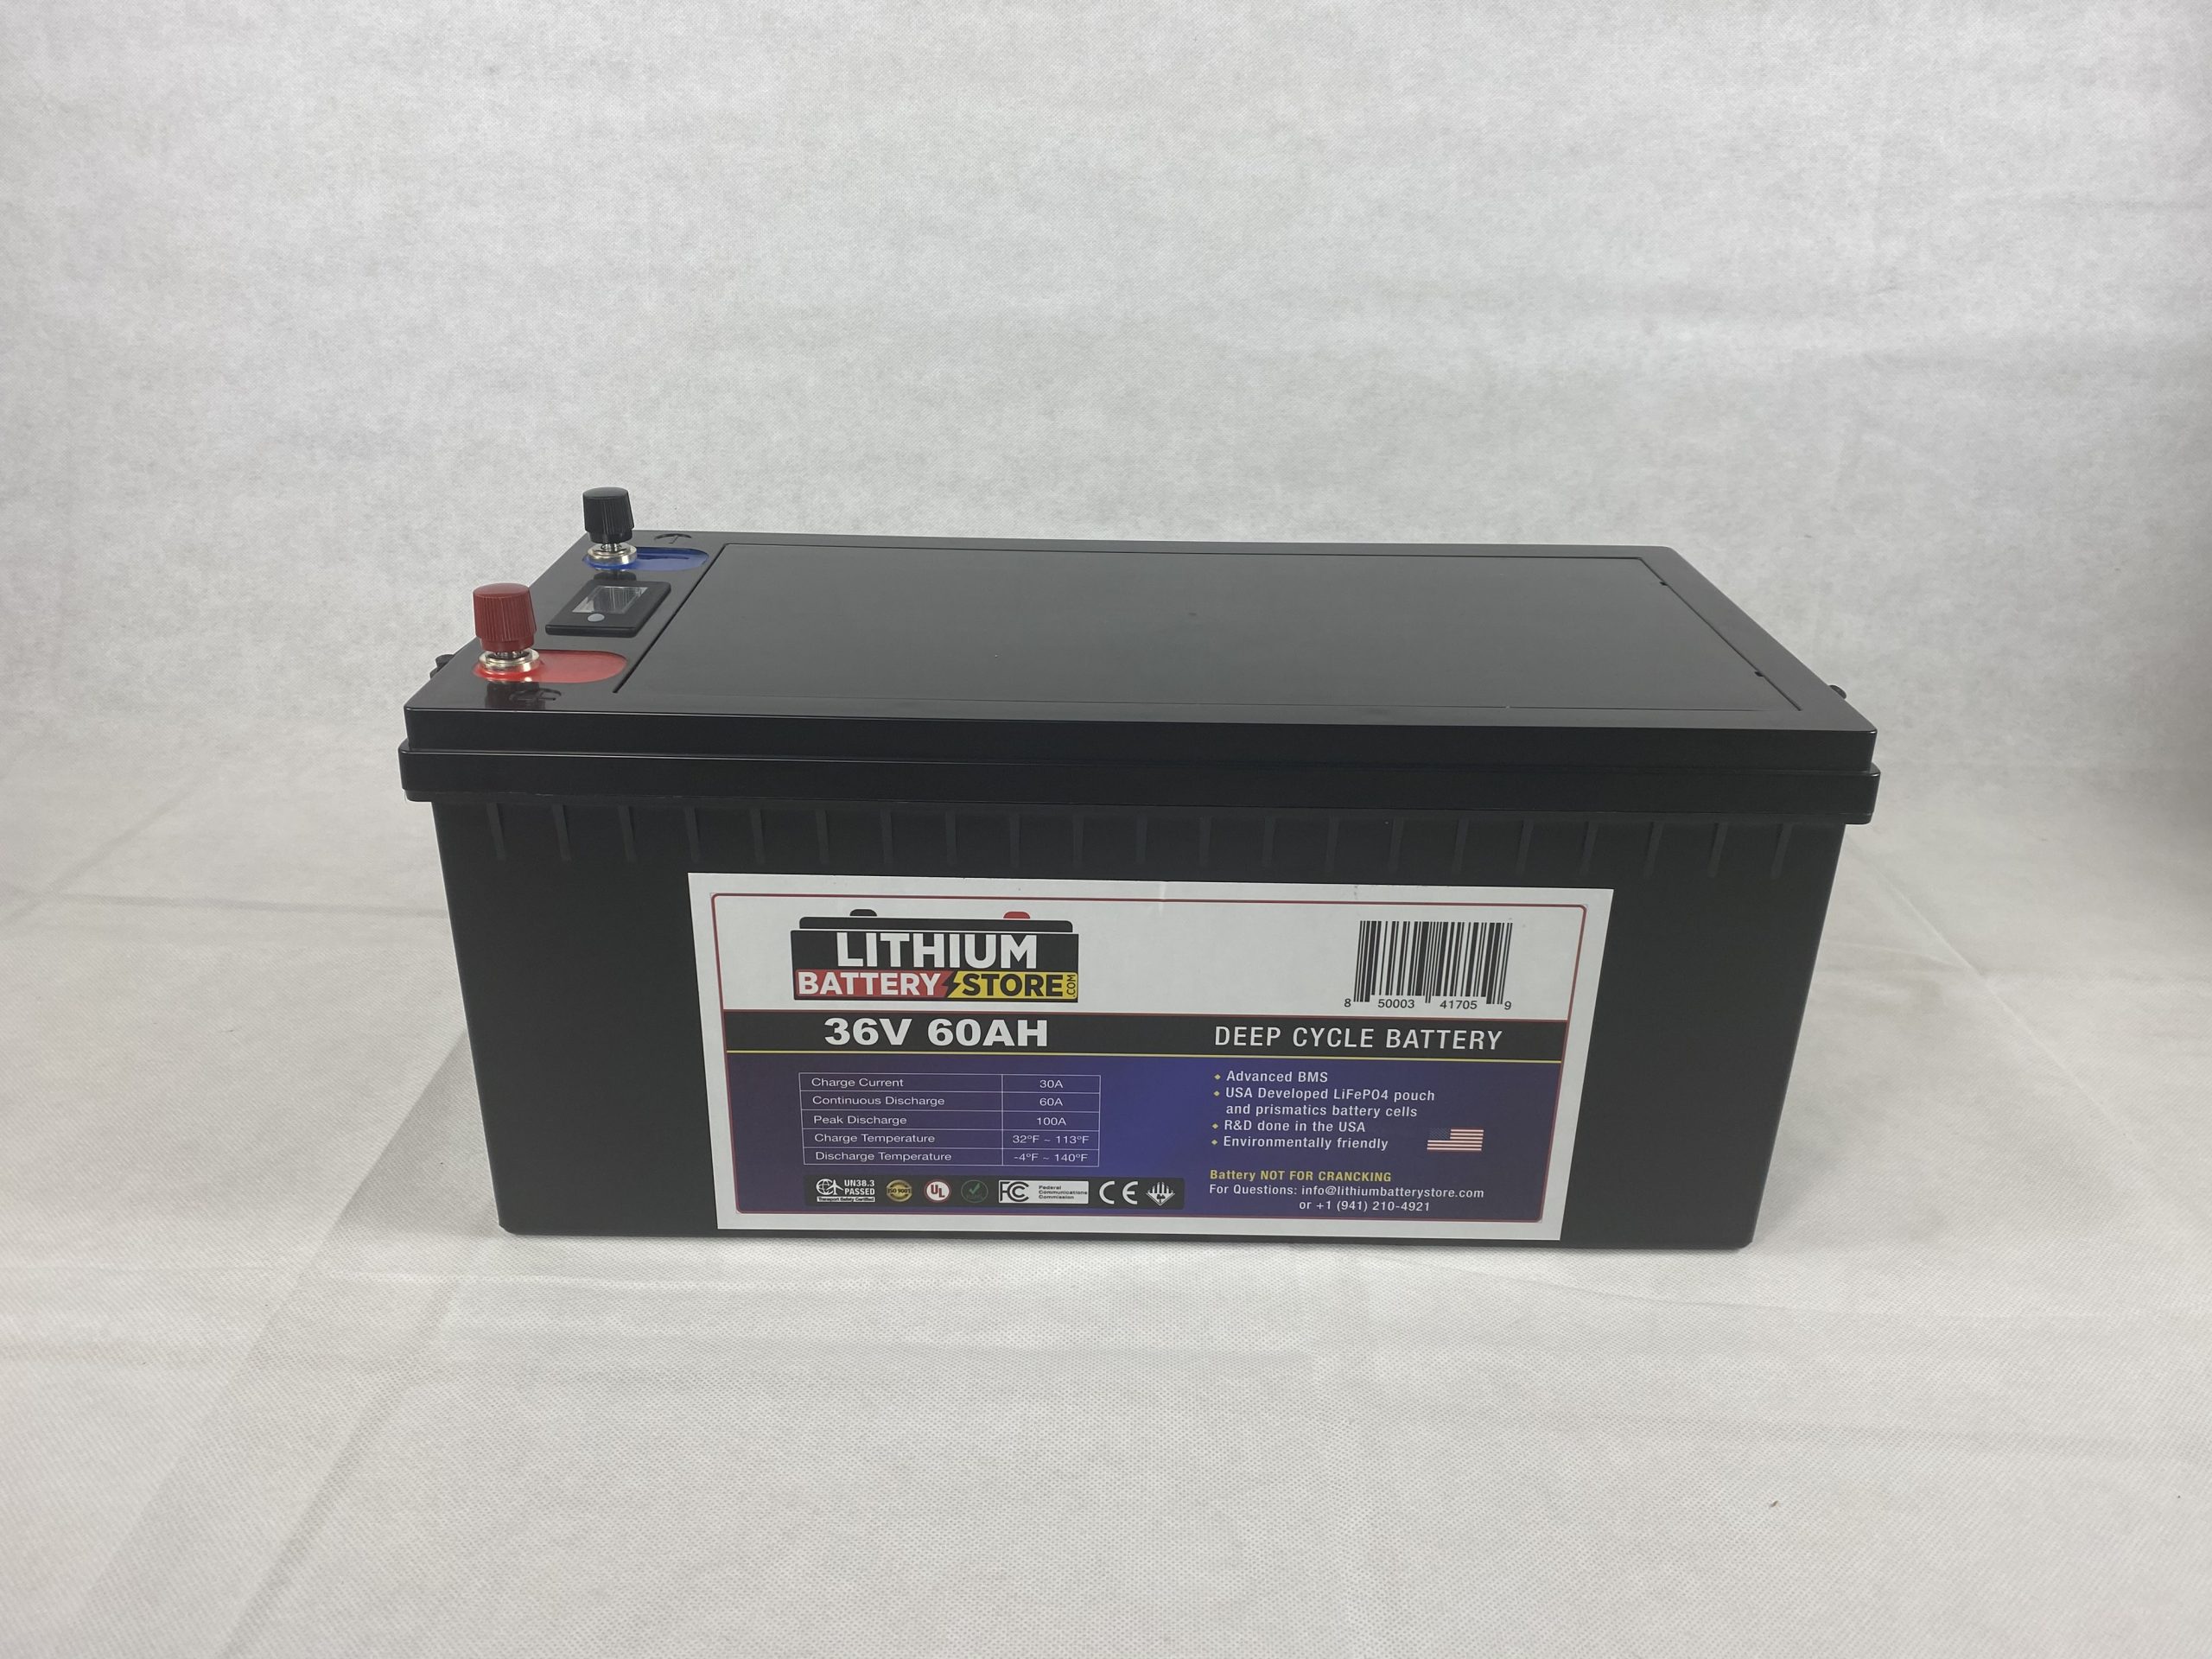 36v 60ah Lbs Deep Cycle Battery Lithium Battery Store